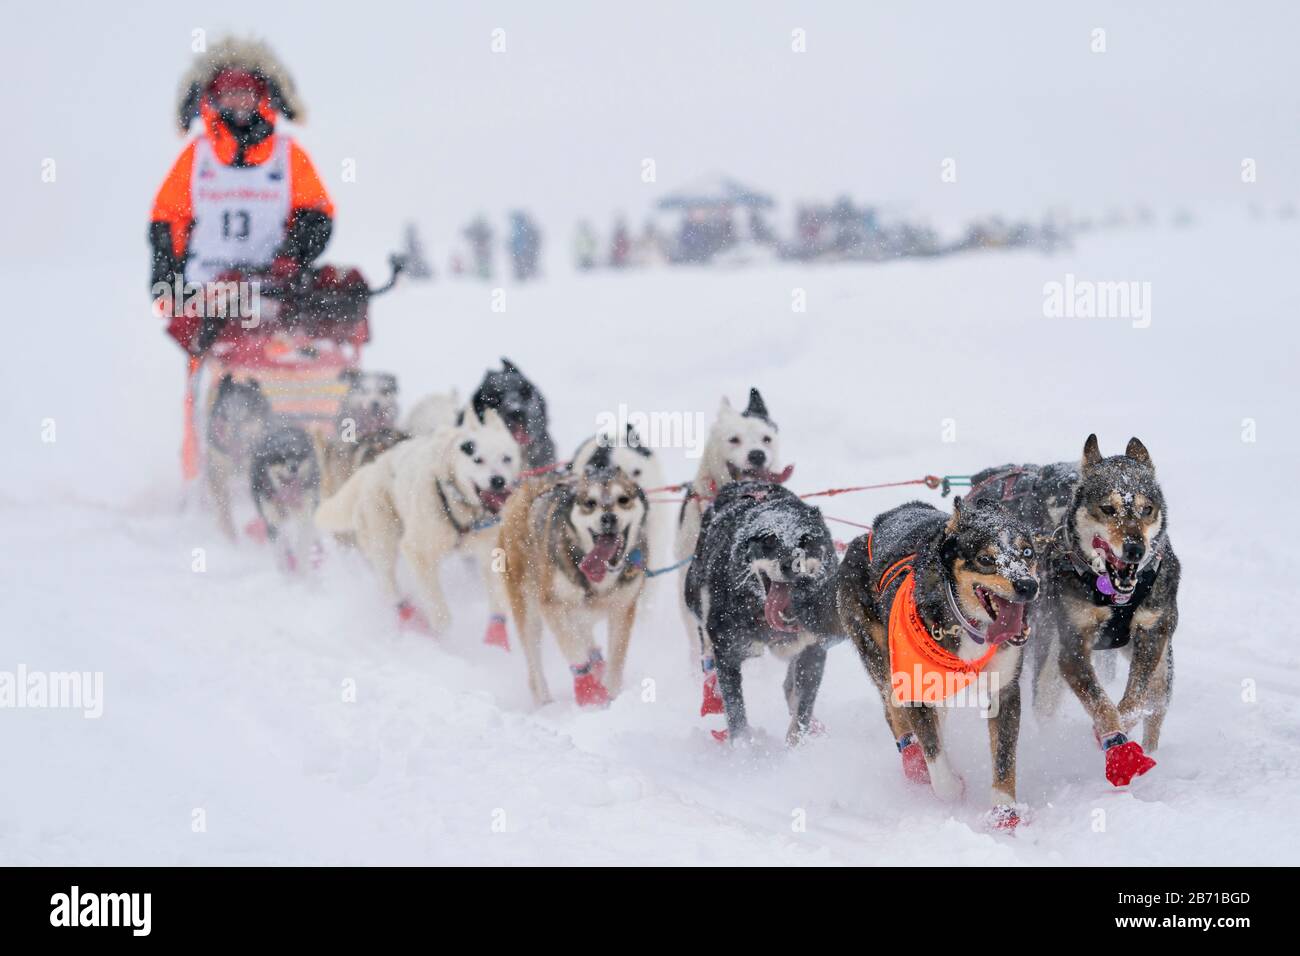 Musher Meredith Mapes competing in the 48th Iditarod Trail Sled Dog Race in Southcentral Alaska. Stock Photo